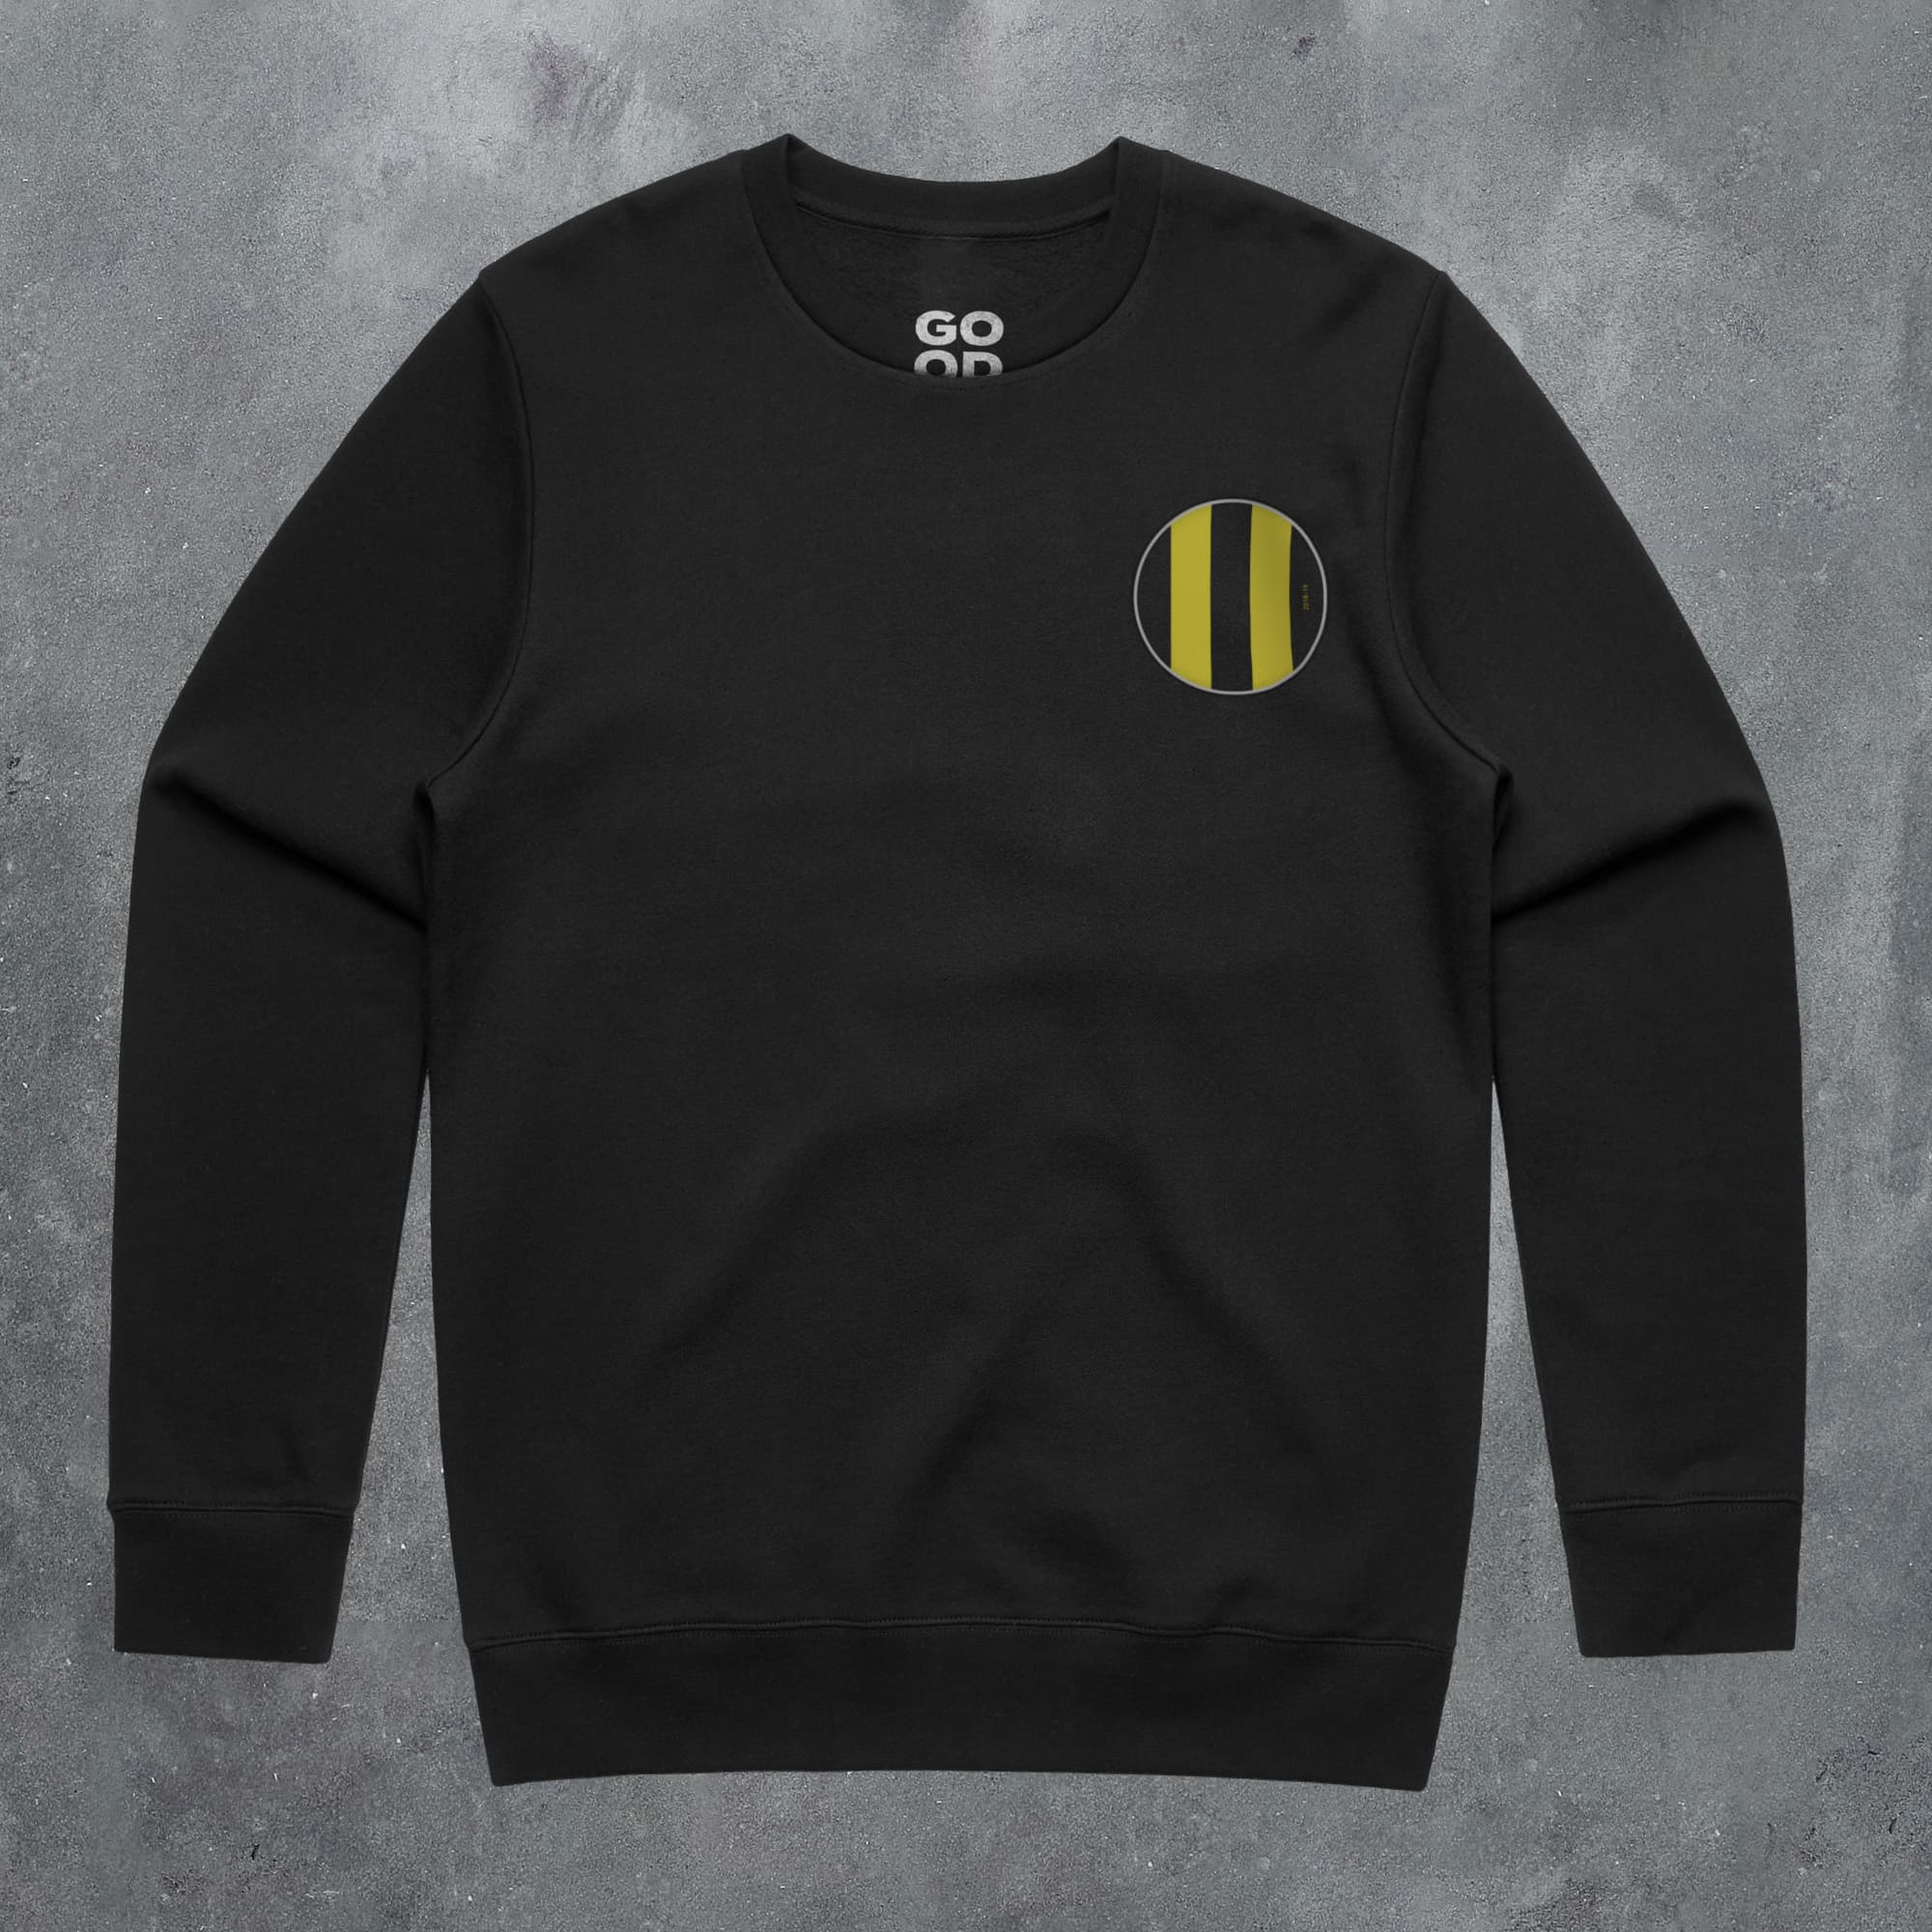 a black sweatshirt with a yellow and black stripe on the chest